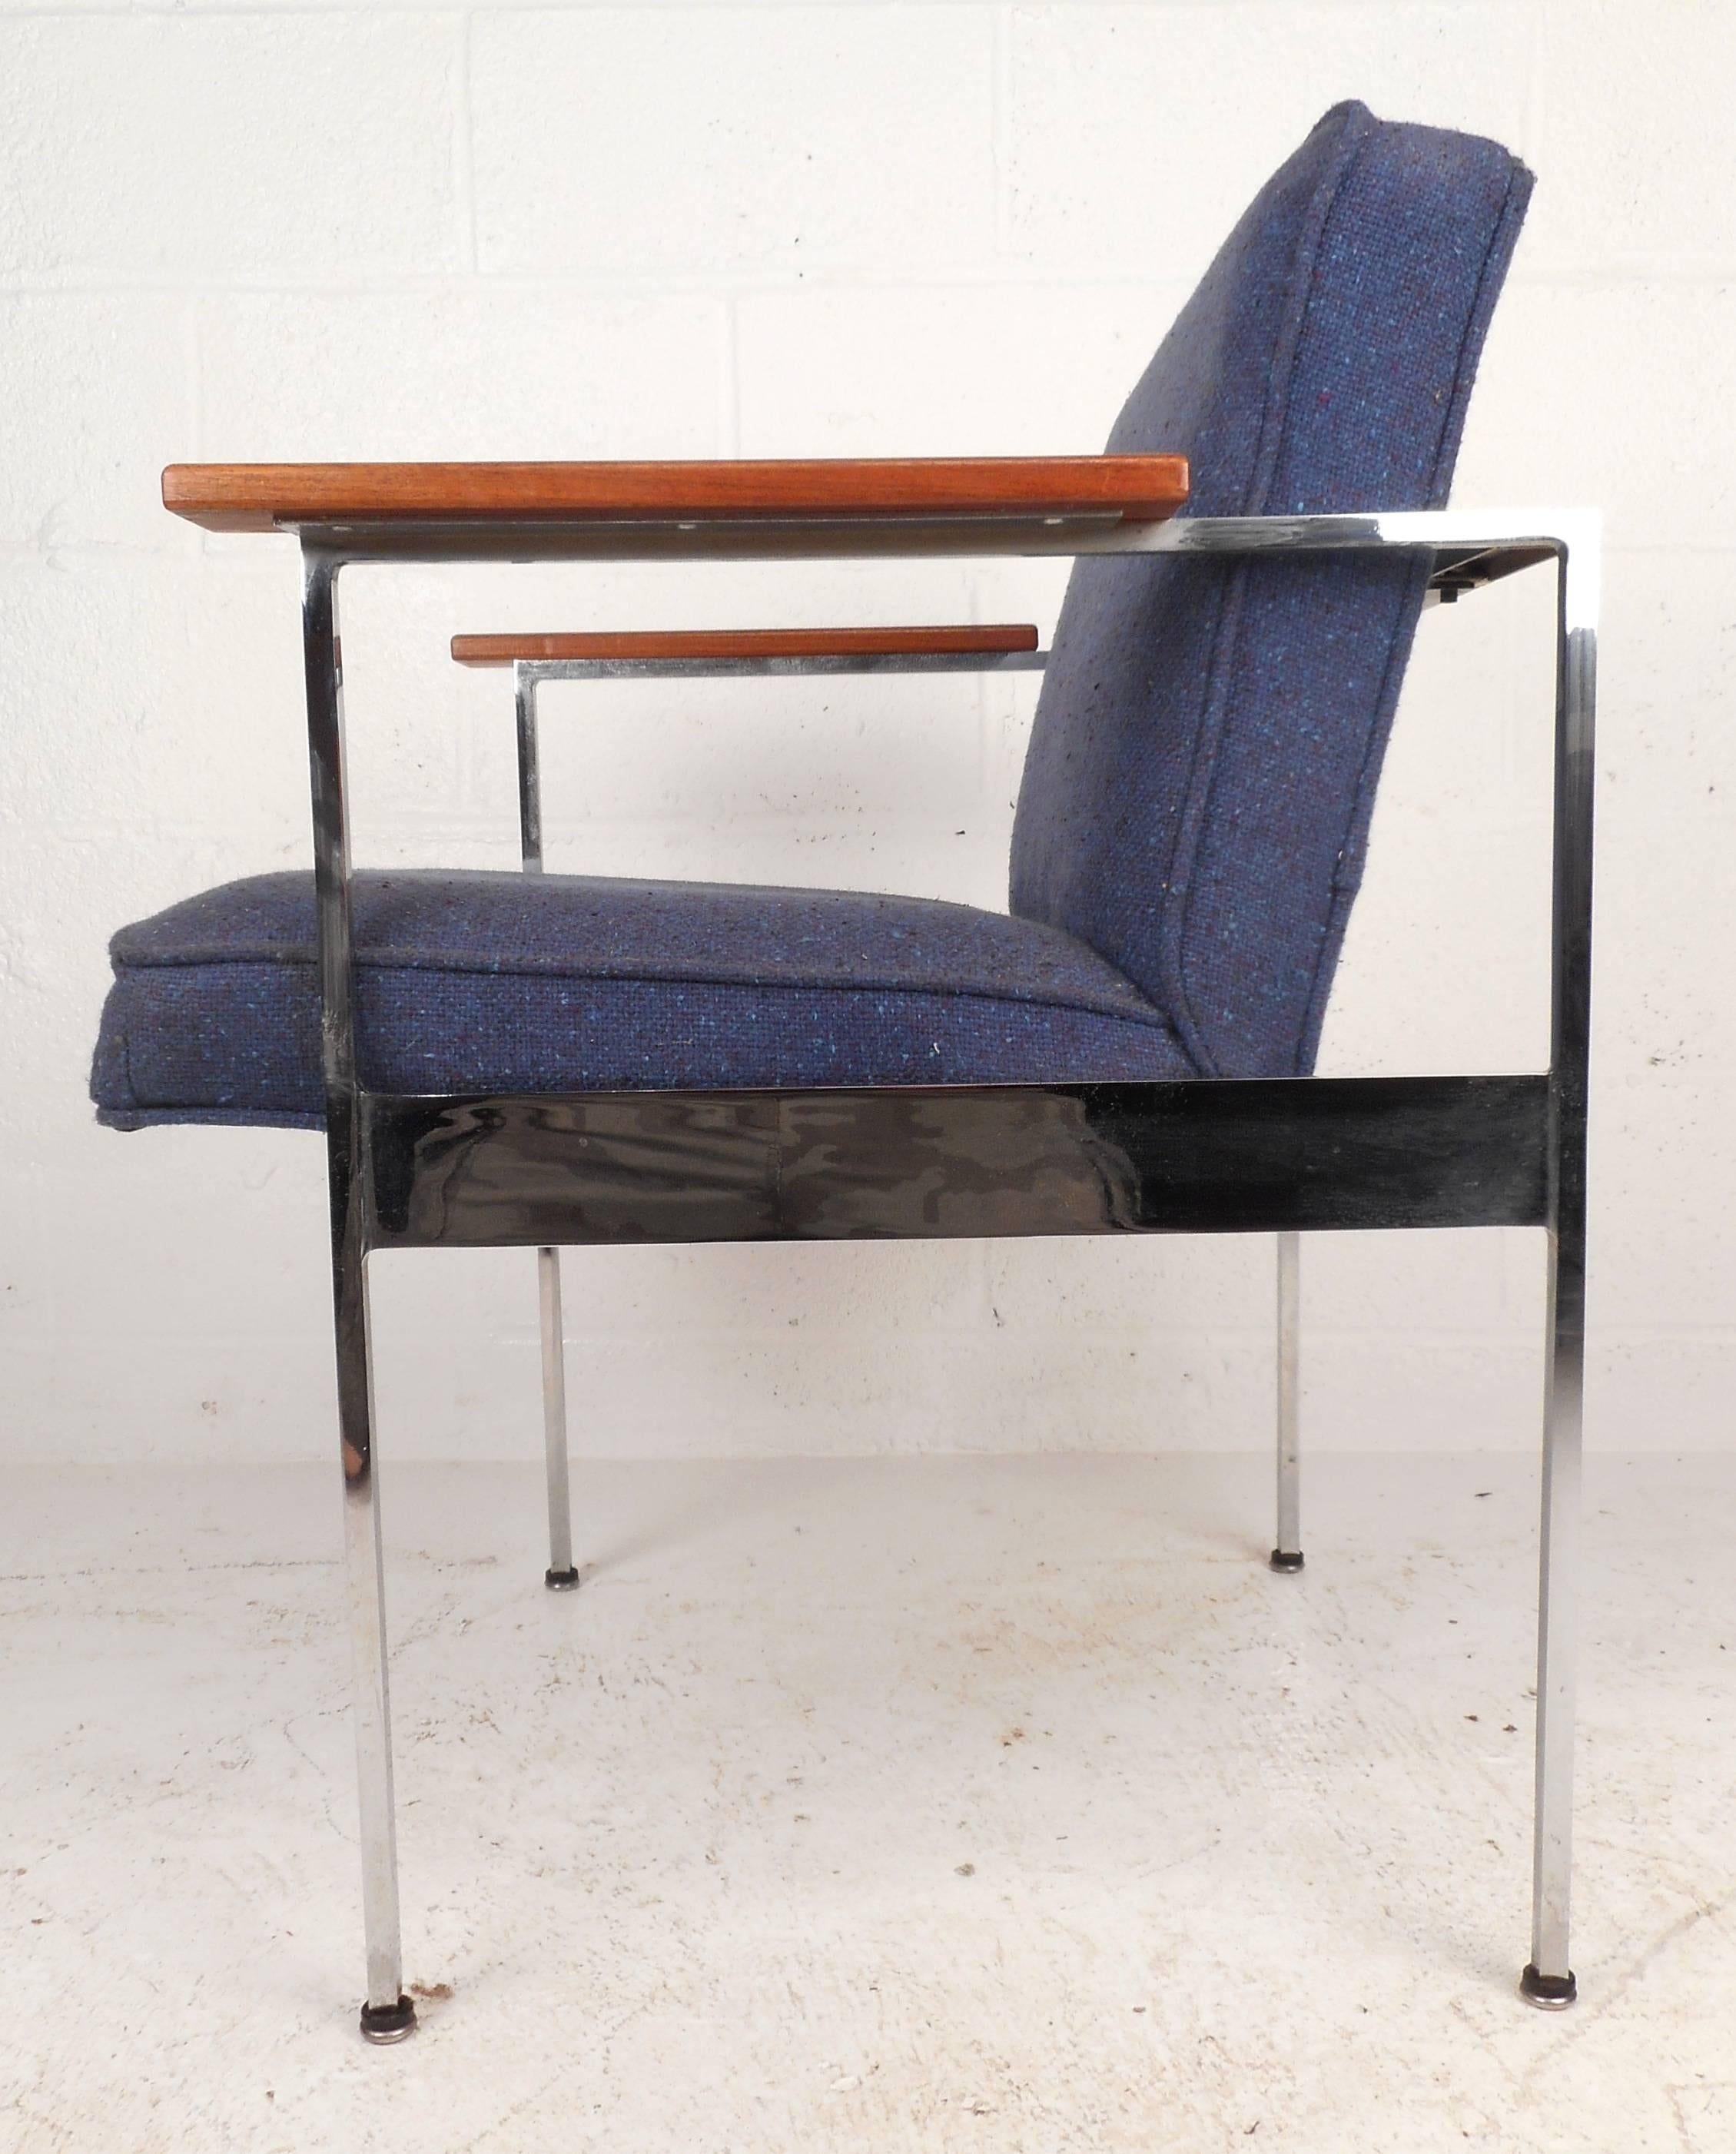 Stunning vintage modern armchair features soft vintage royal blue upholstery and wide wooden armrests. The sleek chrome frame ensures sturdiness without sacrificing comfort, stylish. Please confirm item location (NY or NJ).